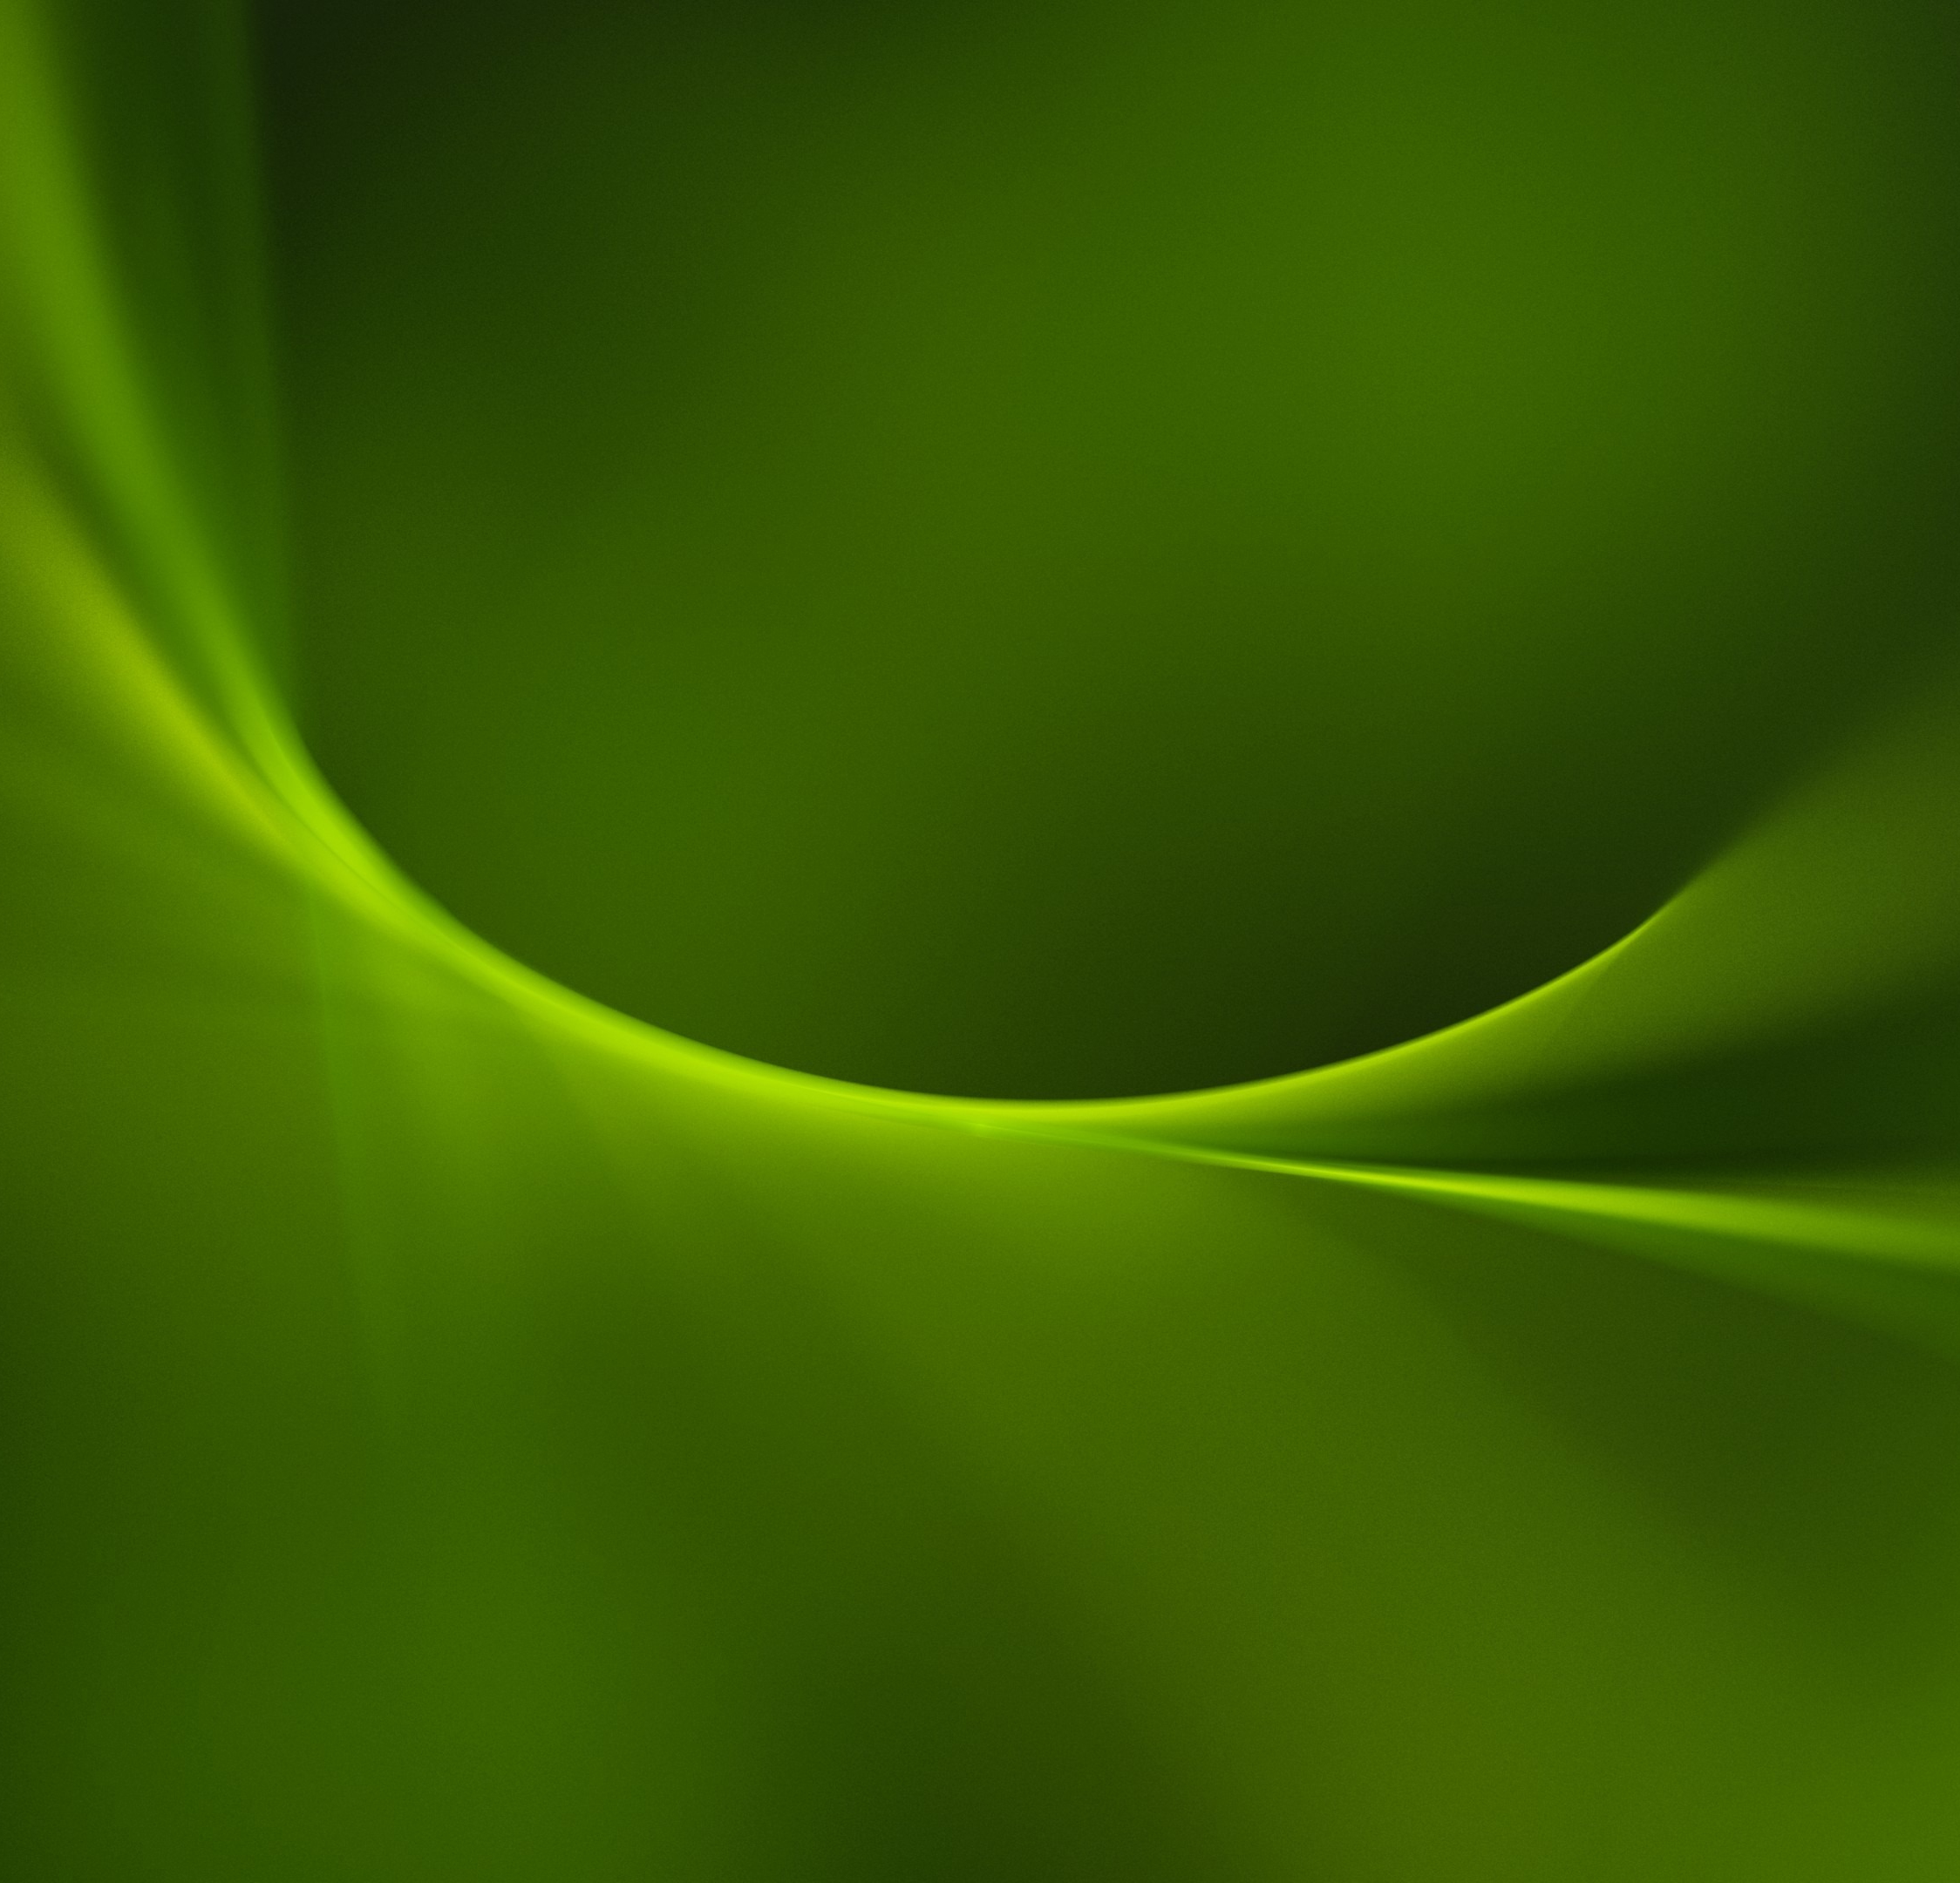 Download 2248x2248 Wallpaper Simple Green Curves Abstract Ipad Air Ipad Air 2 Ipad 3 Ipad 4 Ipad Mini 2 Ipad Mini 3 2248x2248 Hd Image Background 41